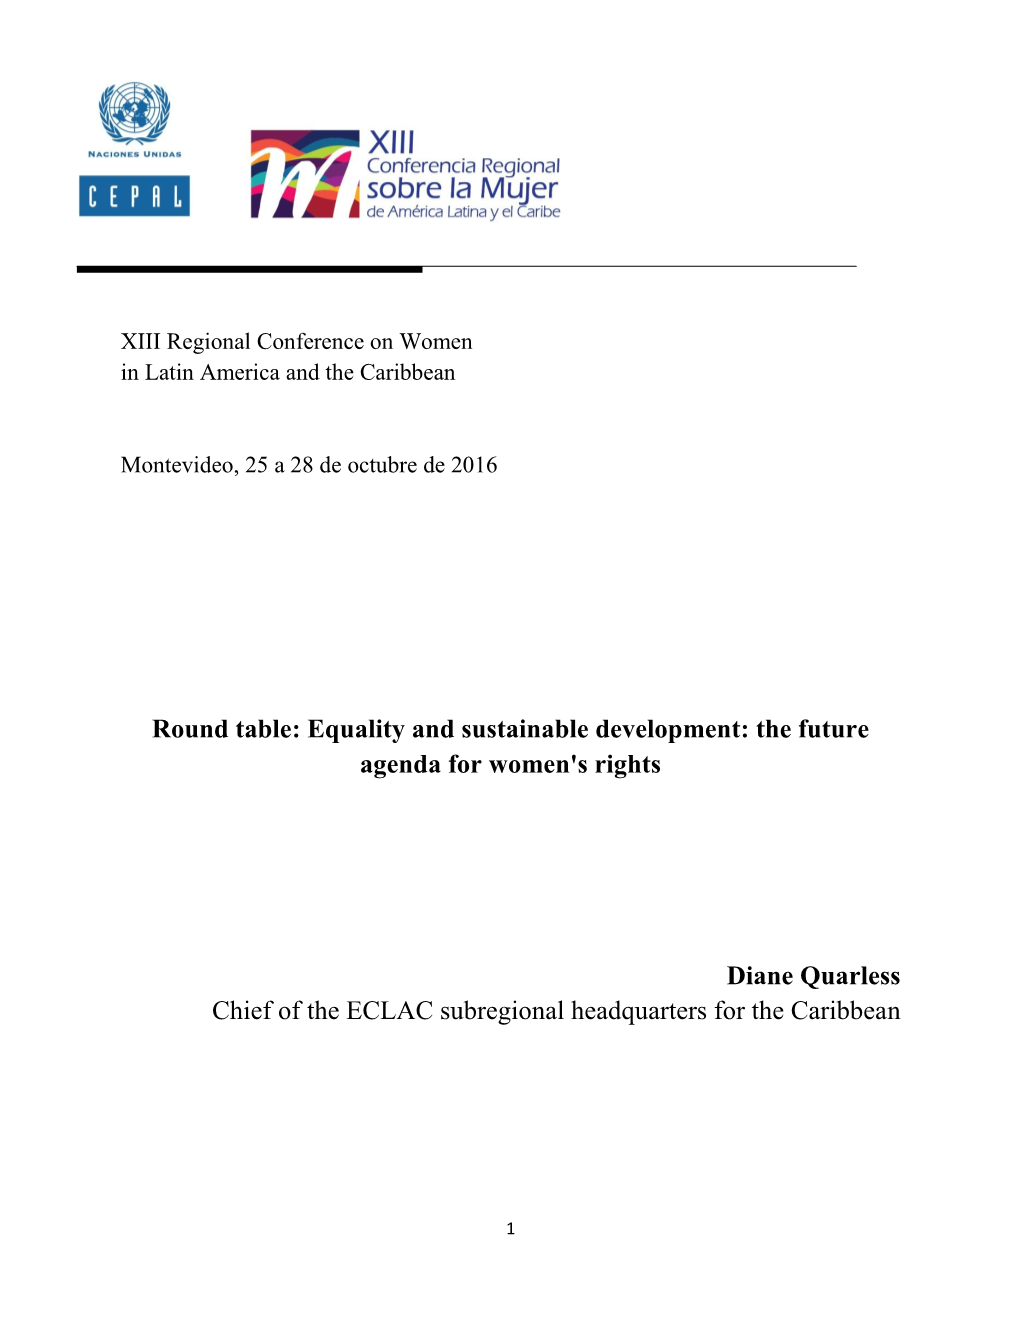 Equality and Sustainable Development: the Future Agenda for Women's Rights